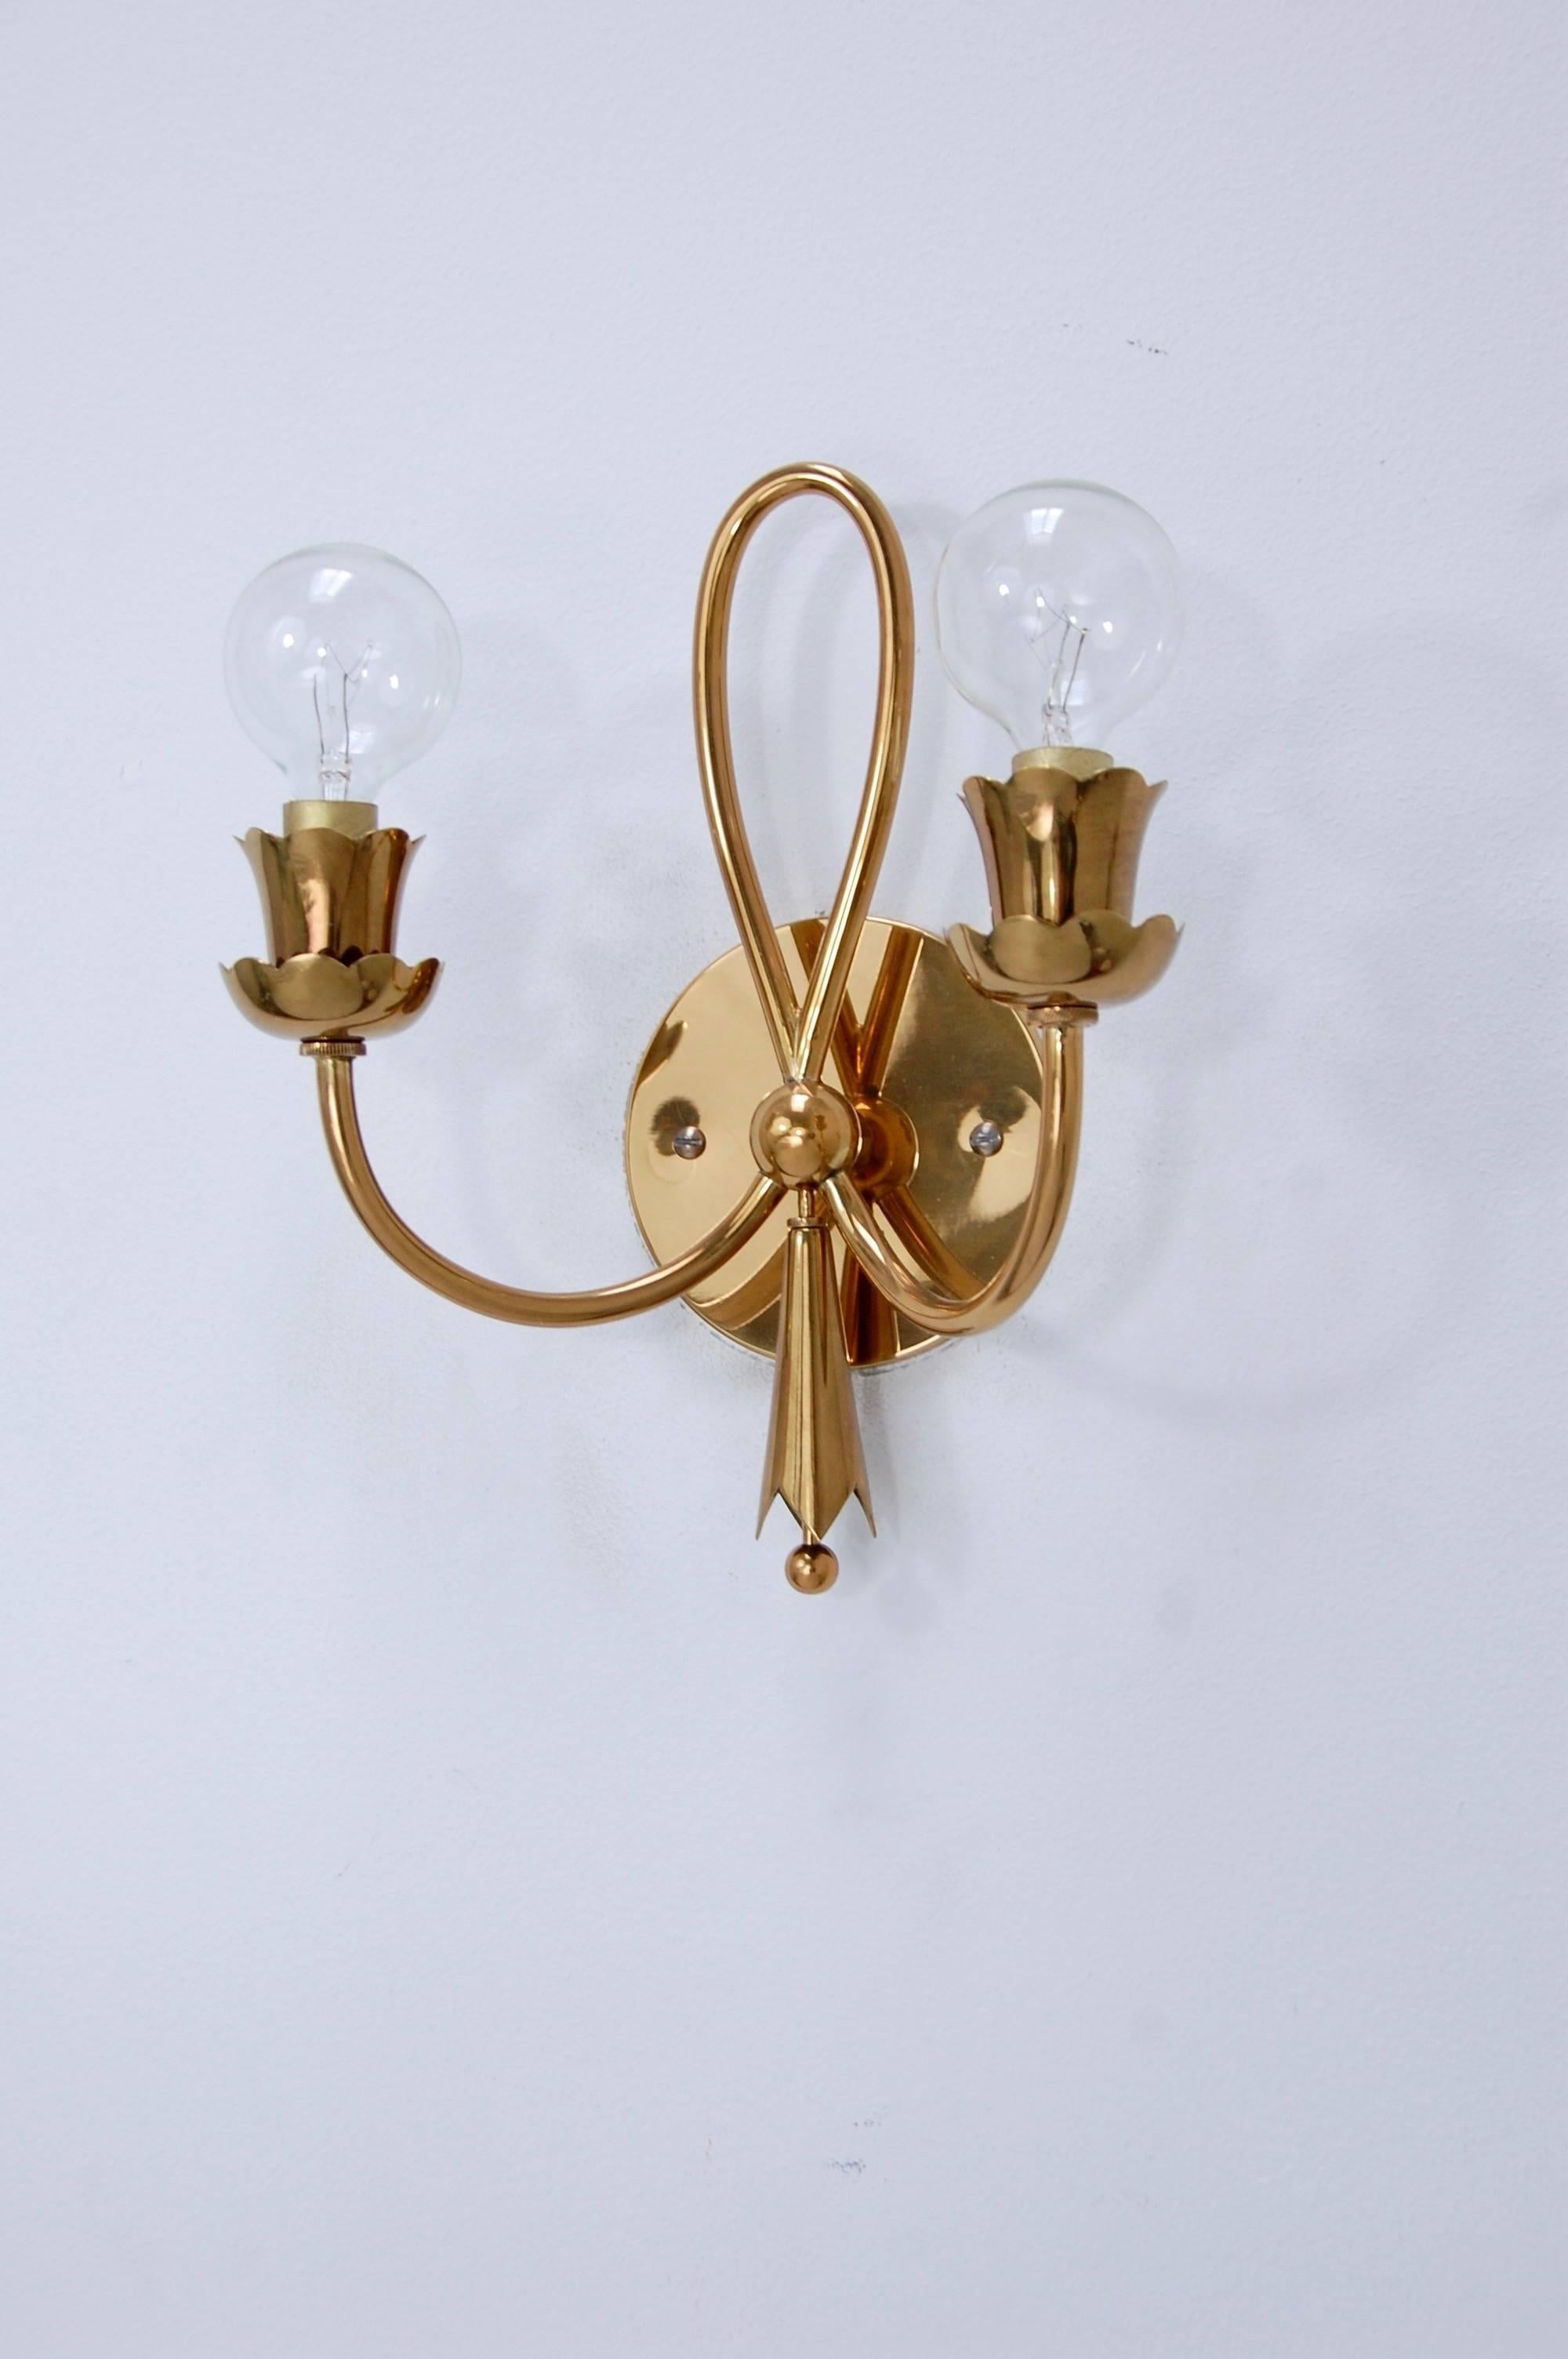 Iconic late 1940s Italian brass sconces in a botanical motif. Two candelabra based sockets per sconce. Fully restored, and rewired for use in the US. We can also rewire for any country upon request.